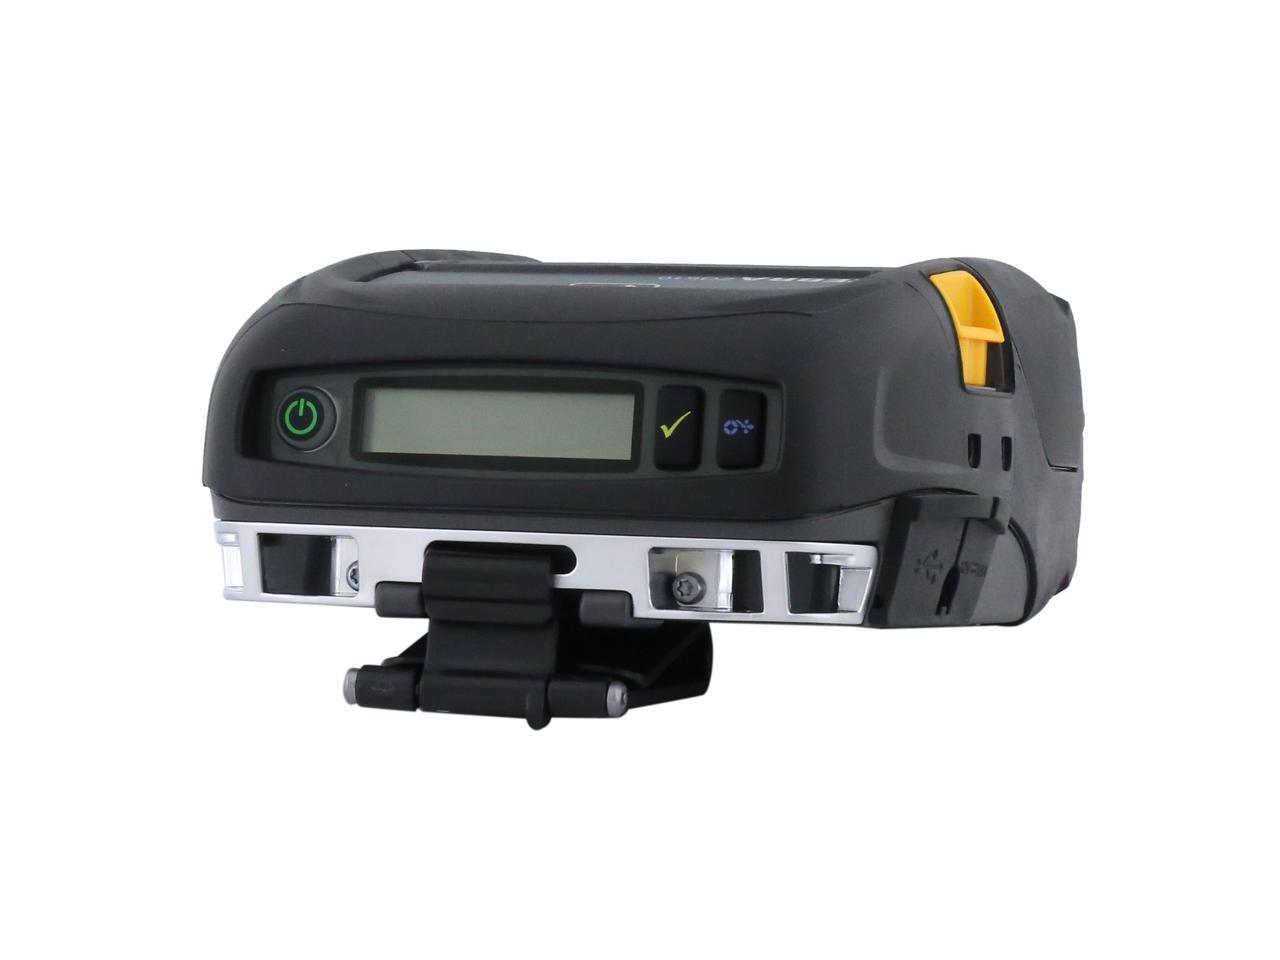 Zebra Zq510 3 Mobile Direct Thermal Receipt And Label Printer 203 Dpi Bluetooth 40 Linered 7670